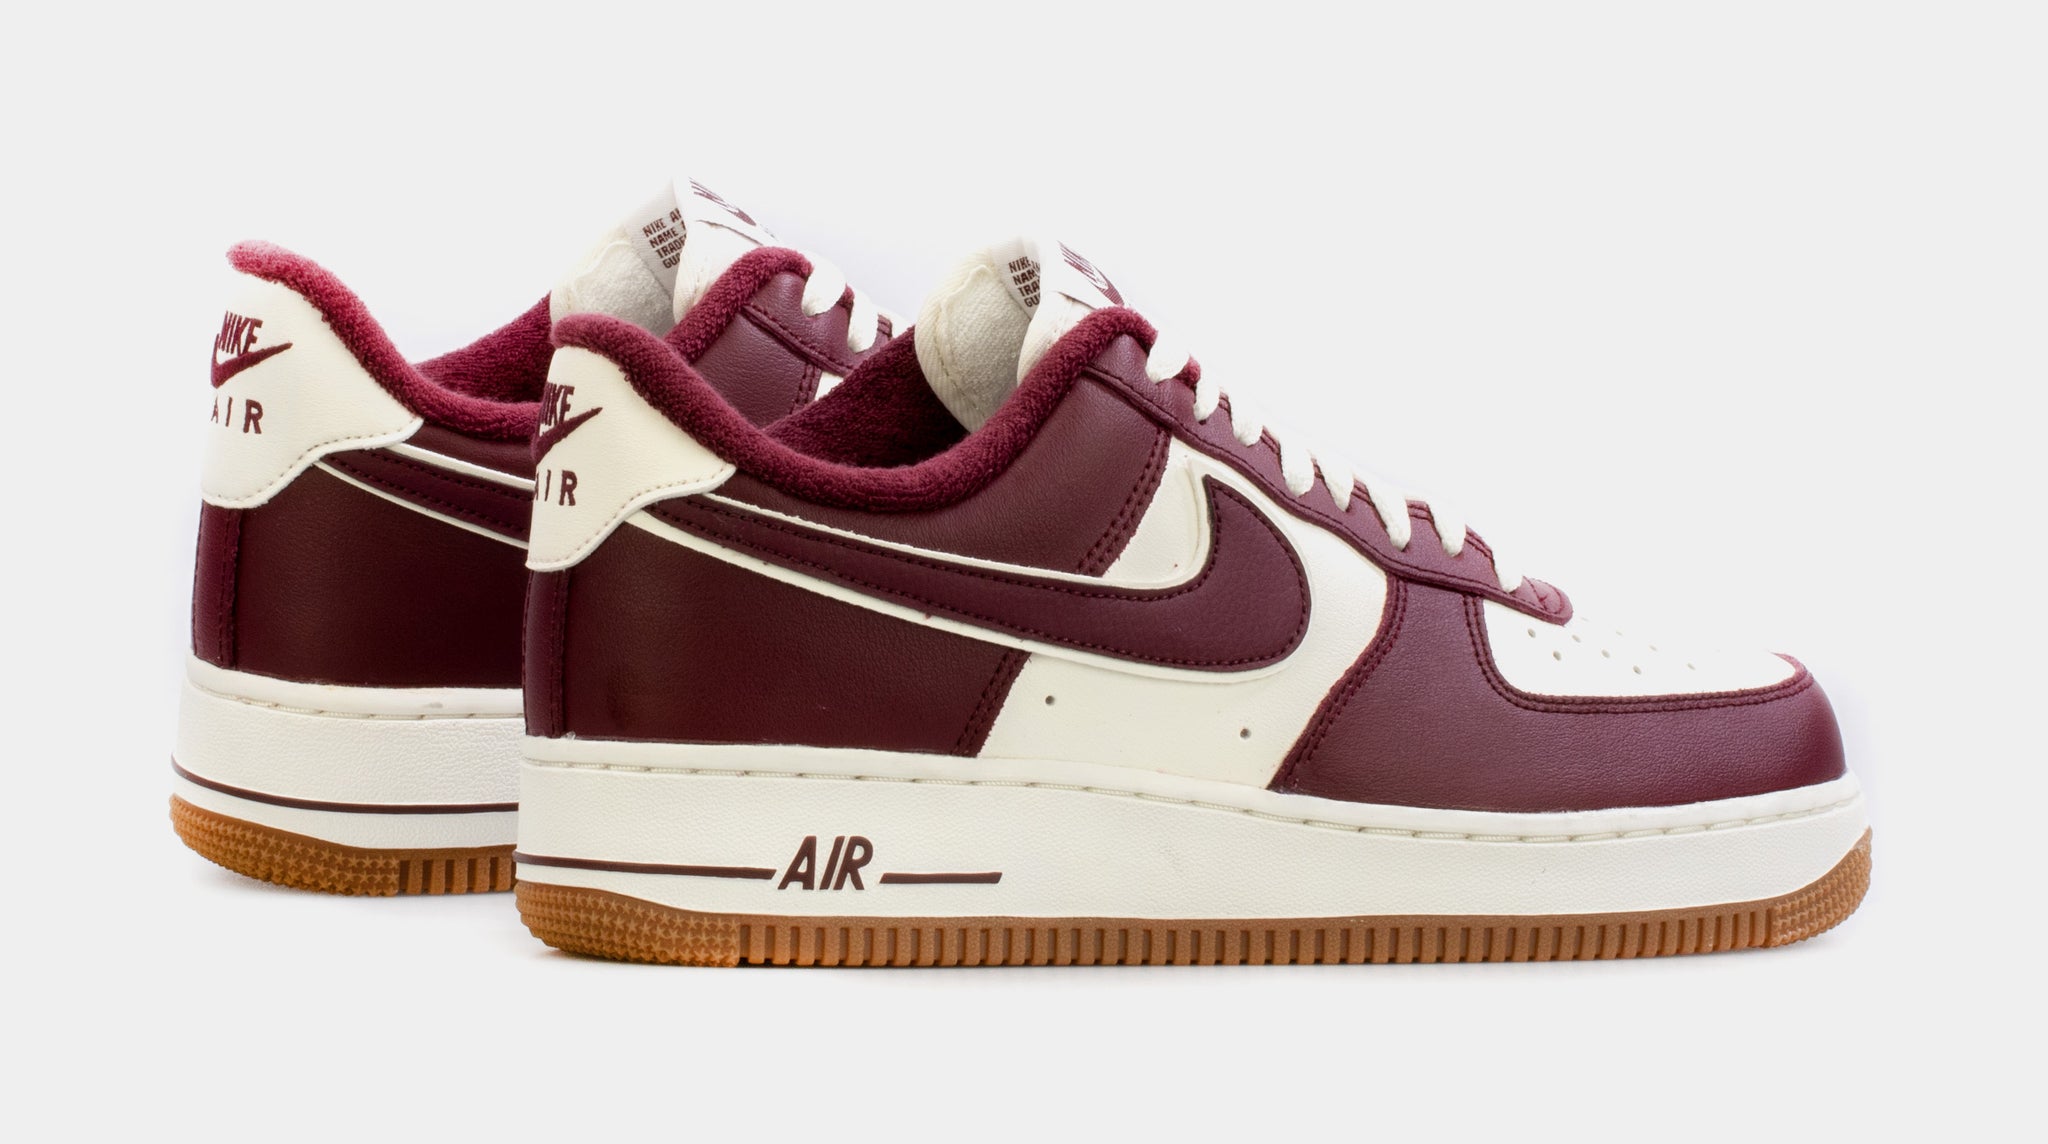 Nike Air Force 1 '07 LV8 'White Night Maroon' | Men's Size 10